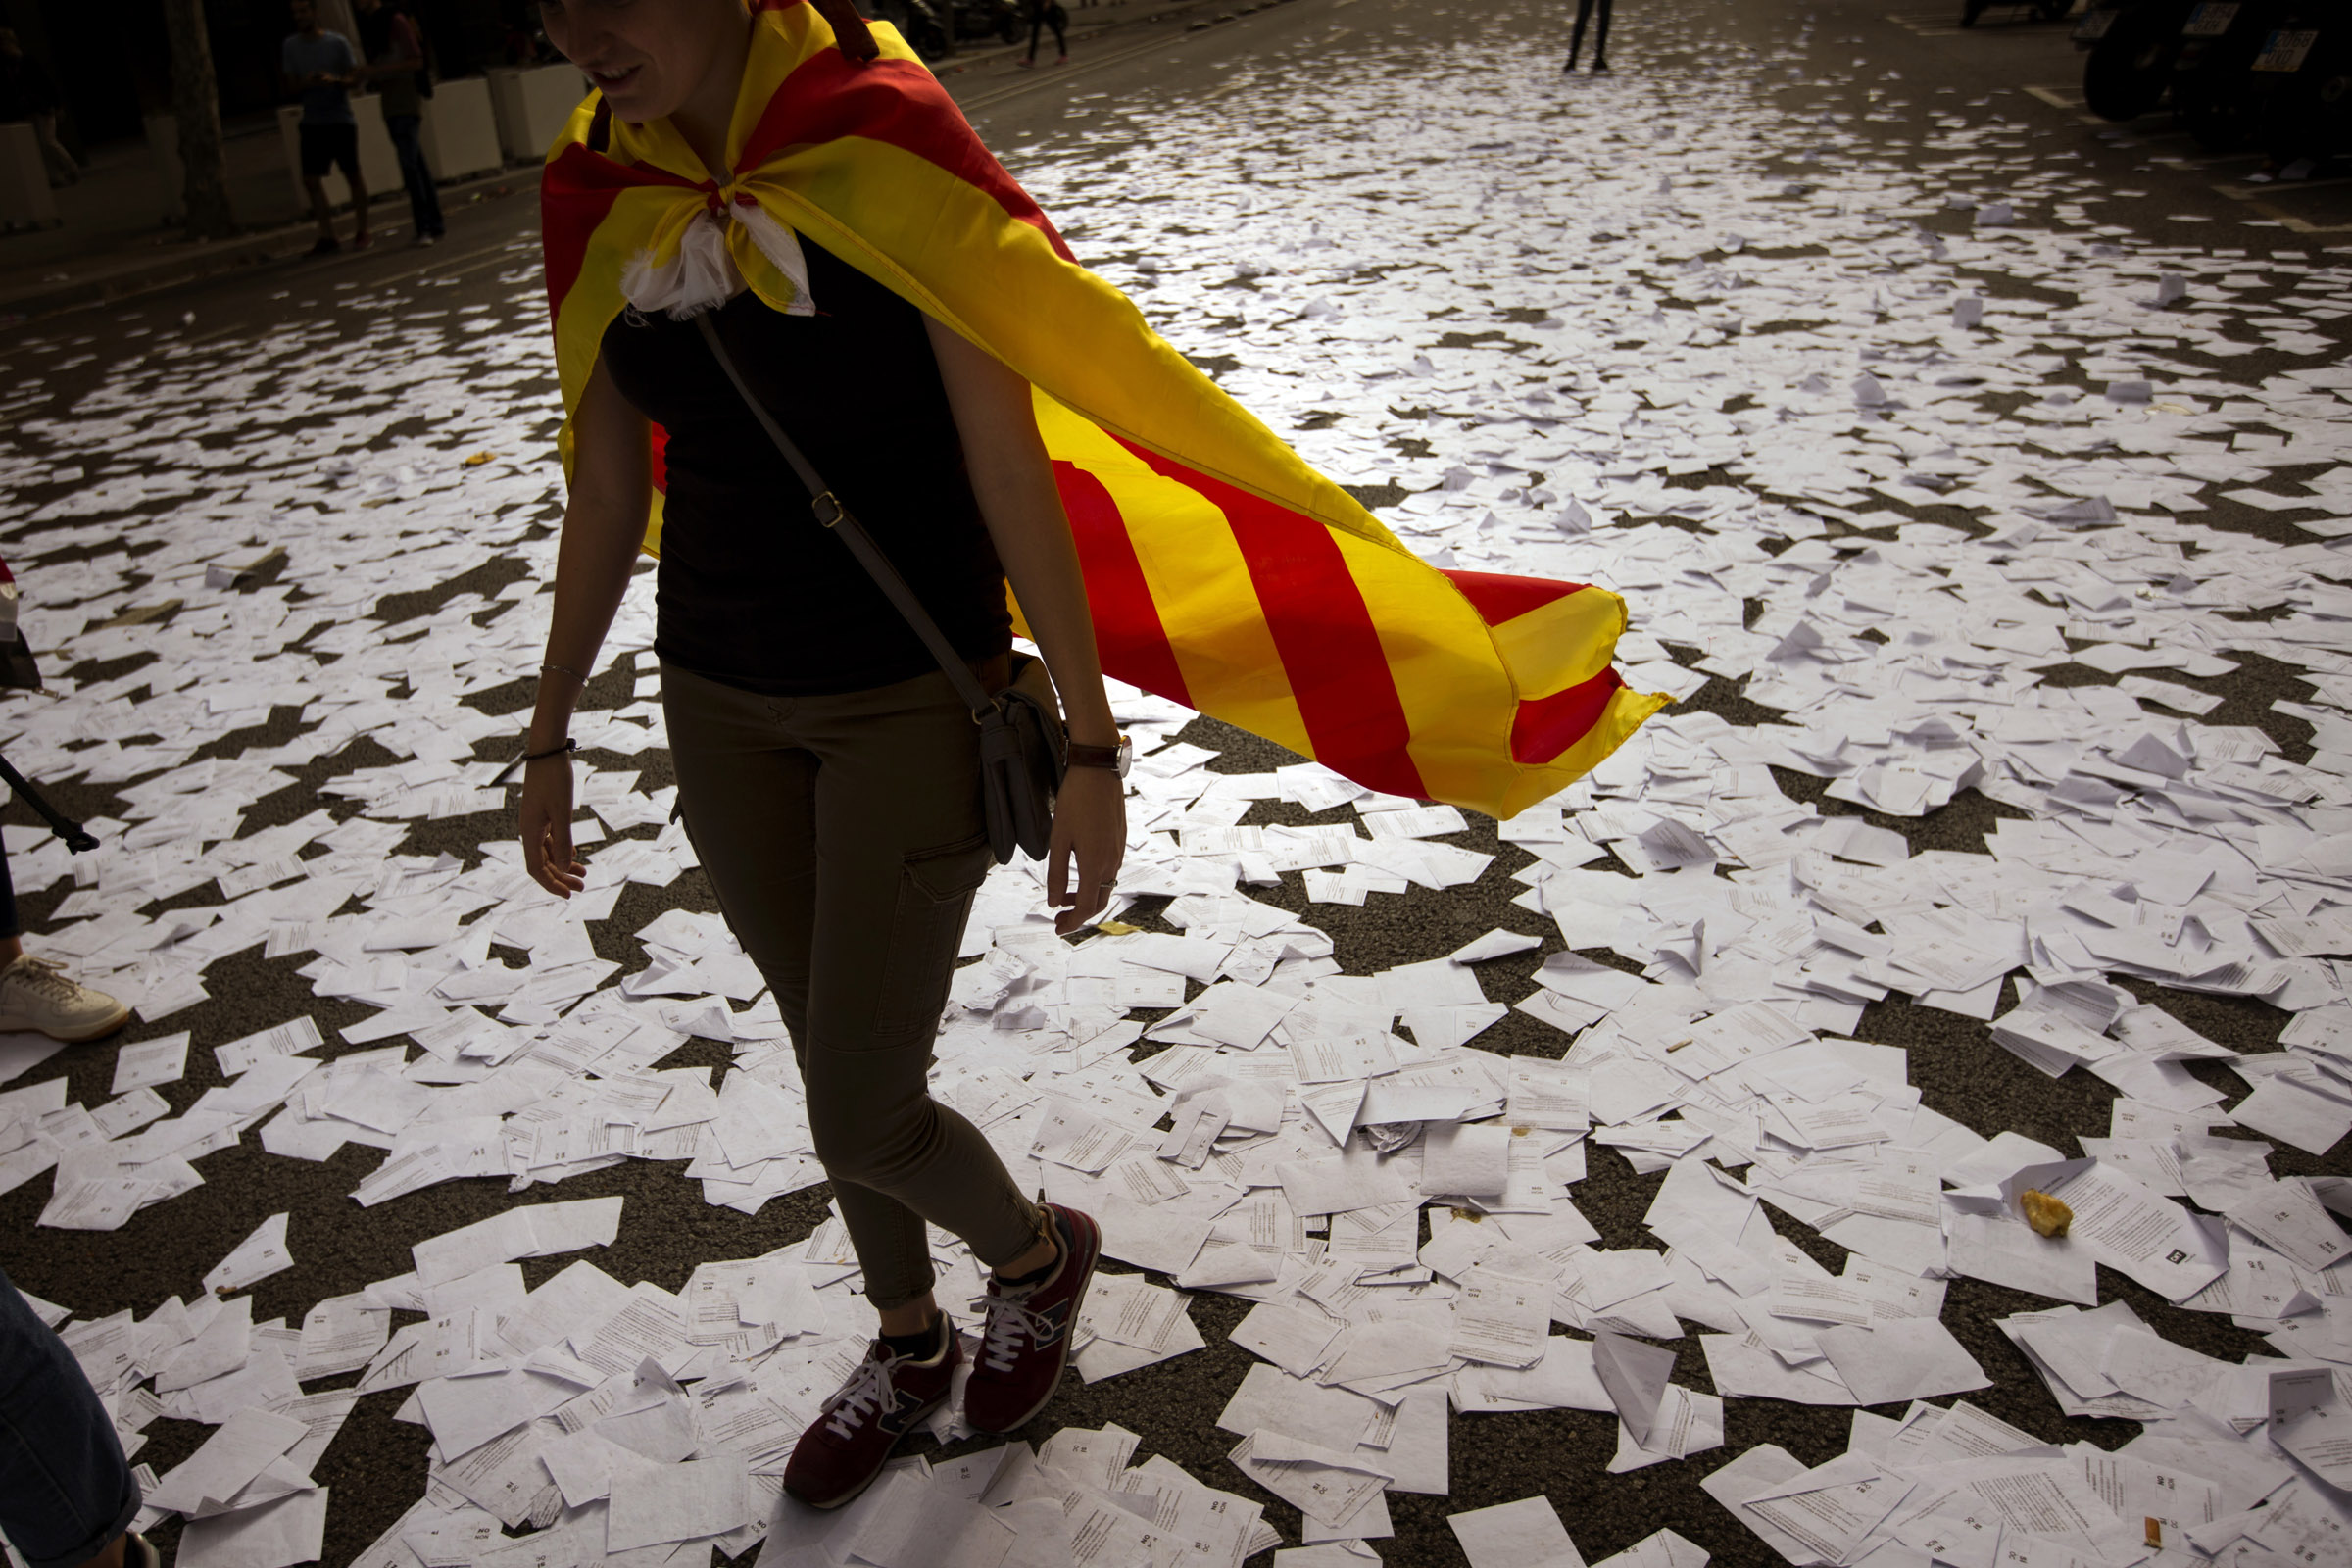 Spanish court suspends Catalonia’s parliamentary session on independence